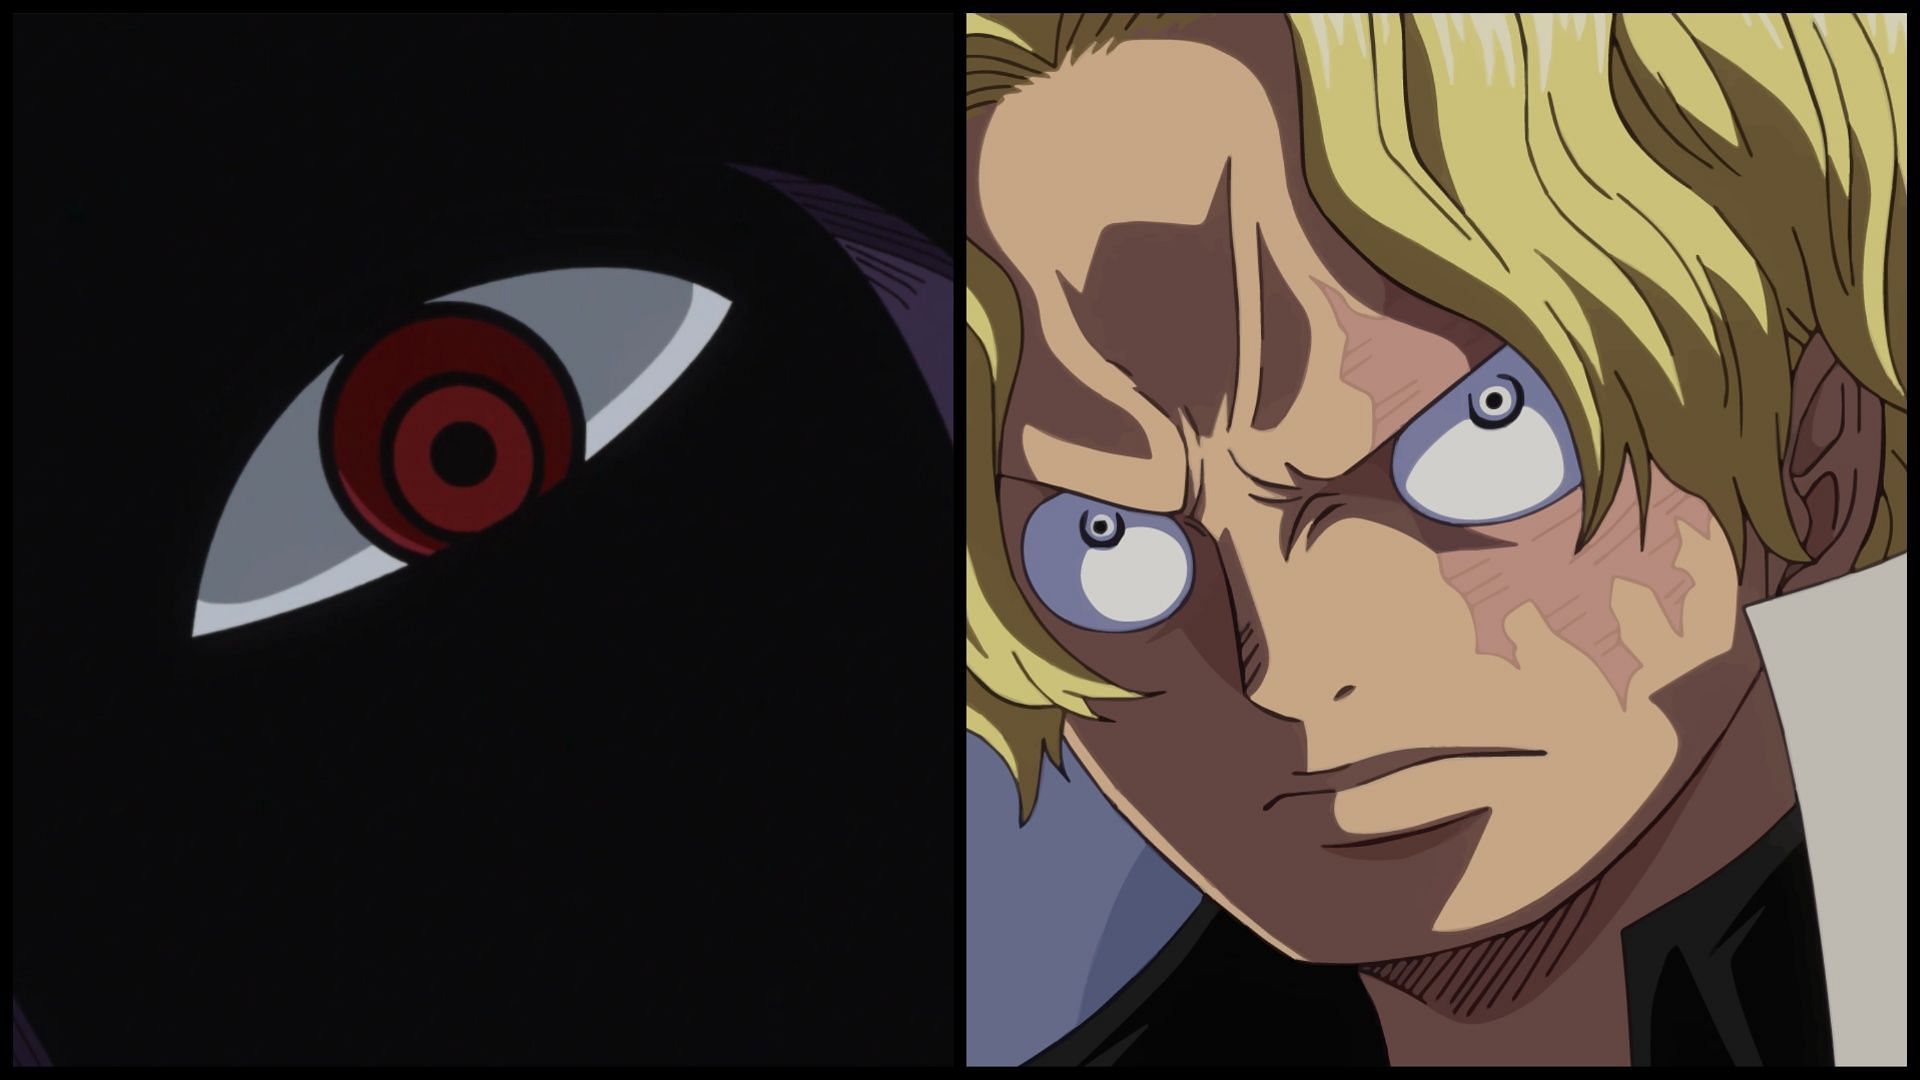 Im-sama makes a shocking appearance while Sabo finds help from an unlikely ally (Image via Sportskeeda)